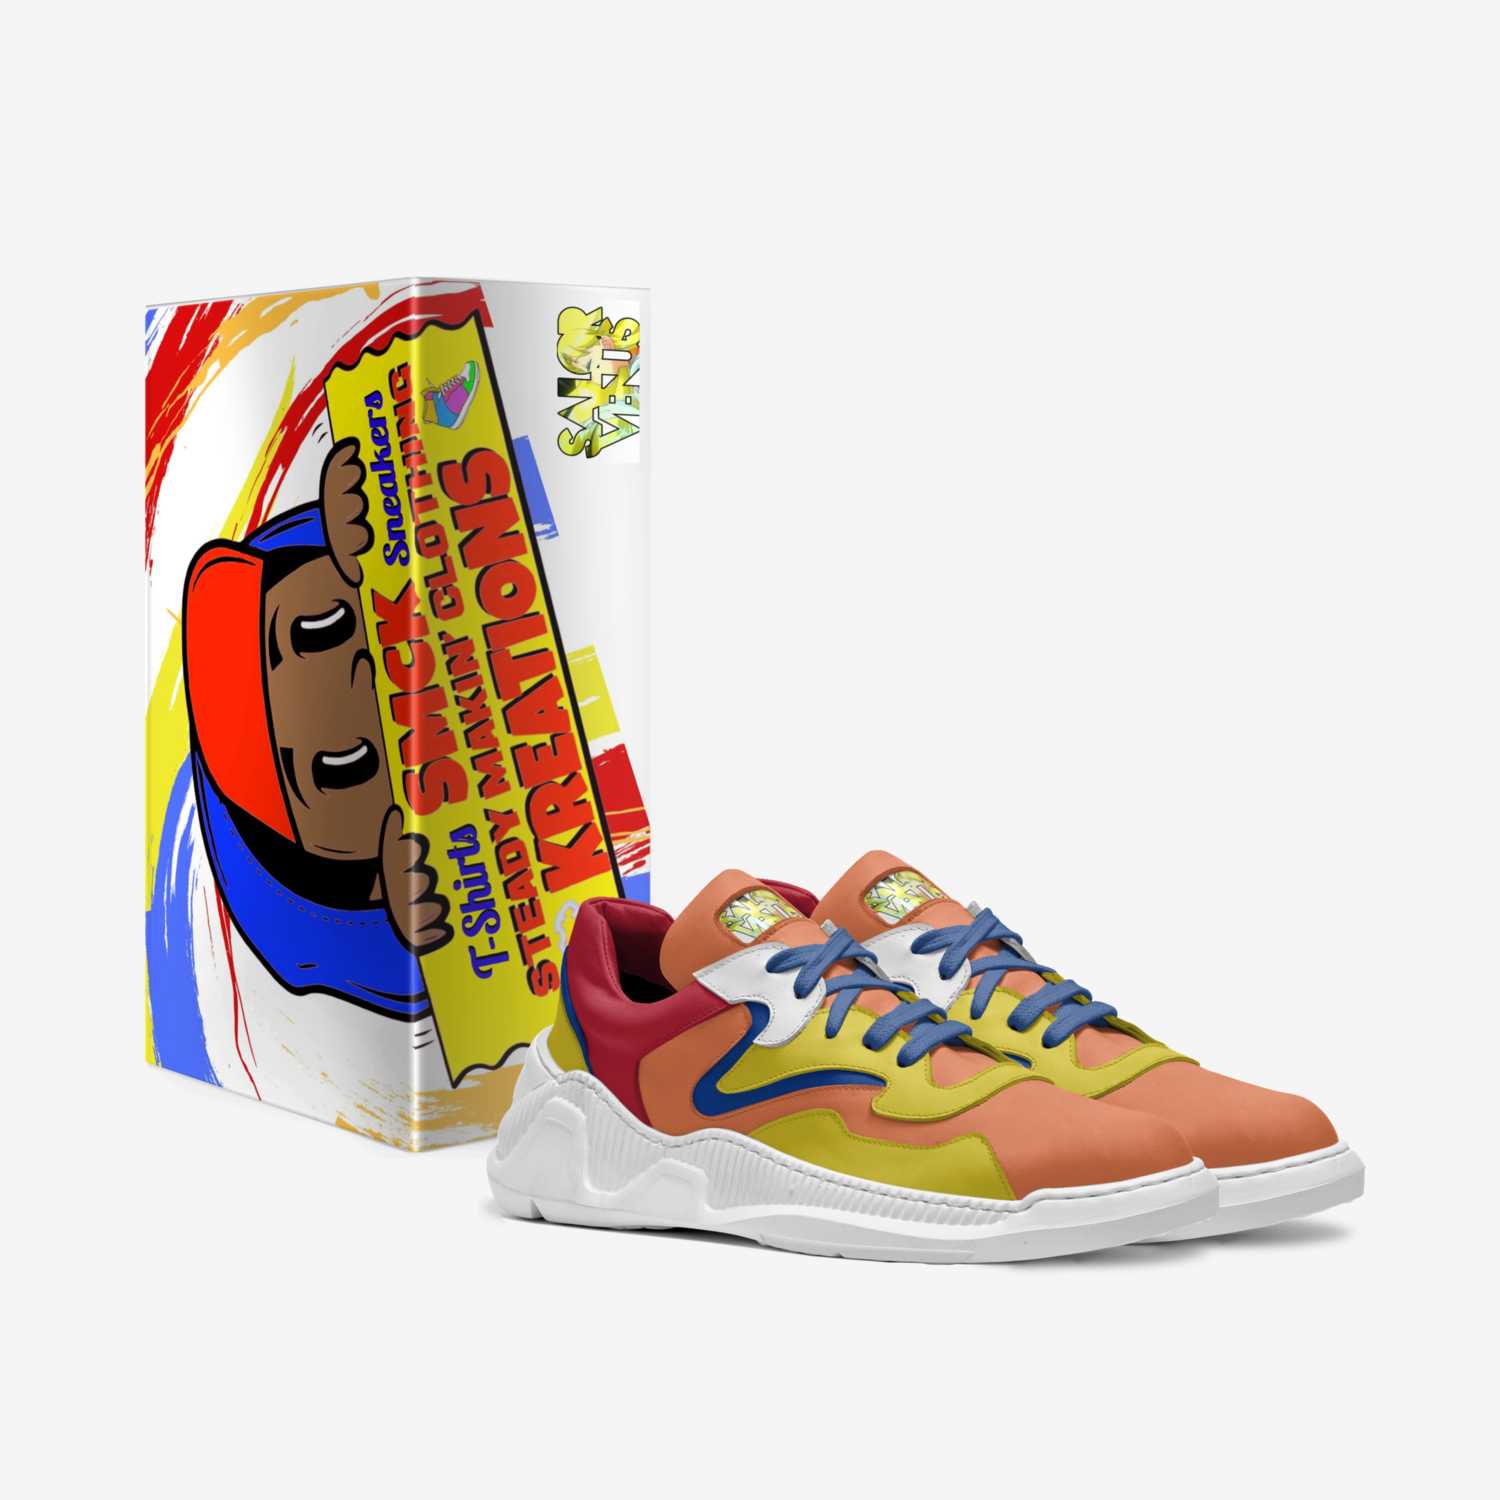 Sailor Venus custom made in Italy shoes by Shawn Mcnair | Box view